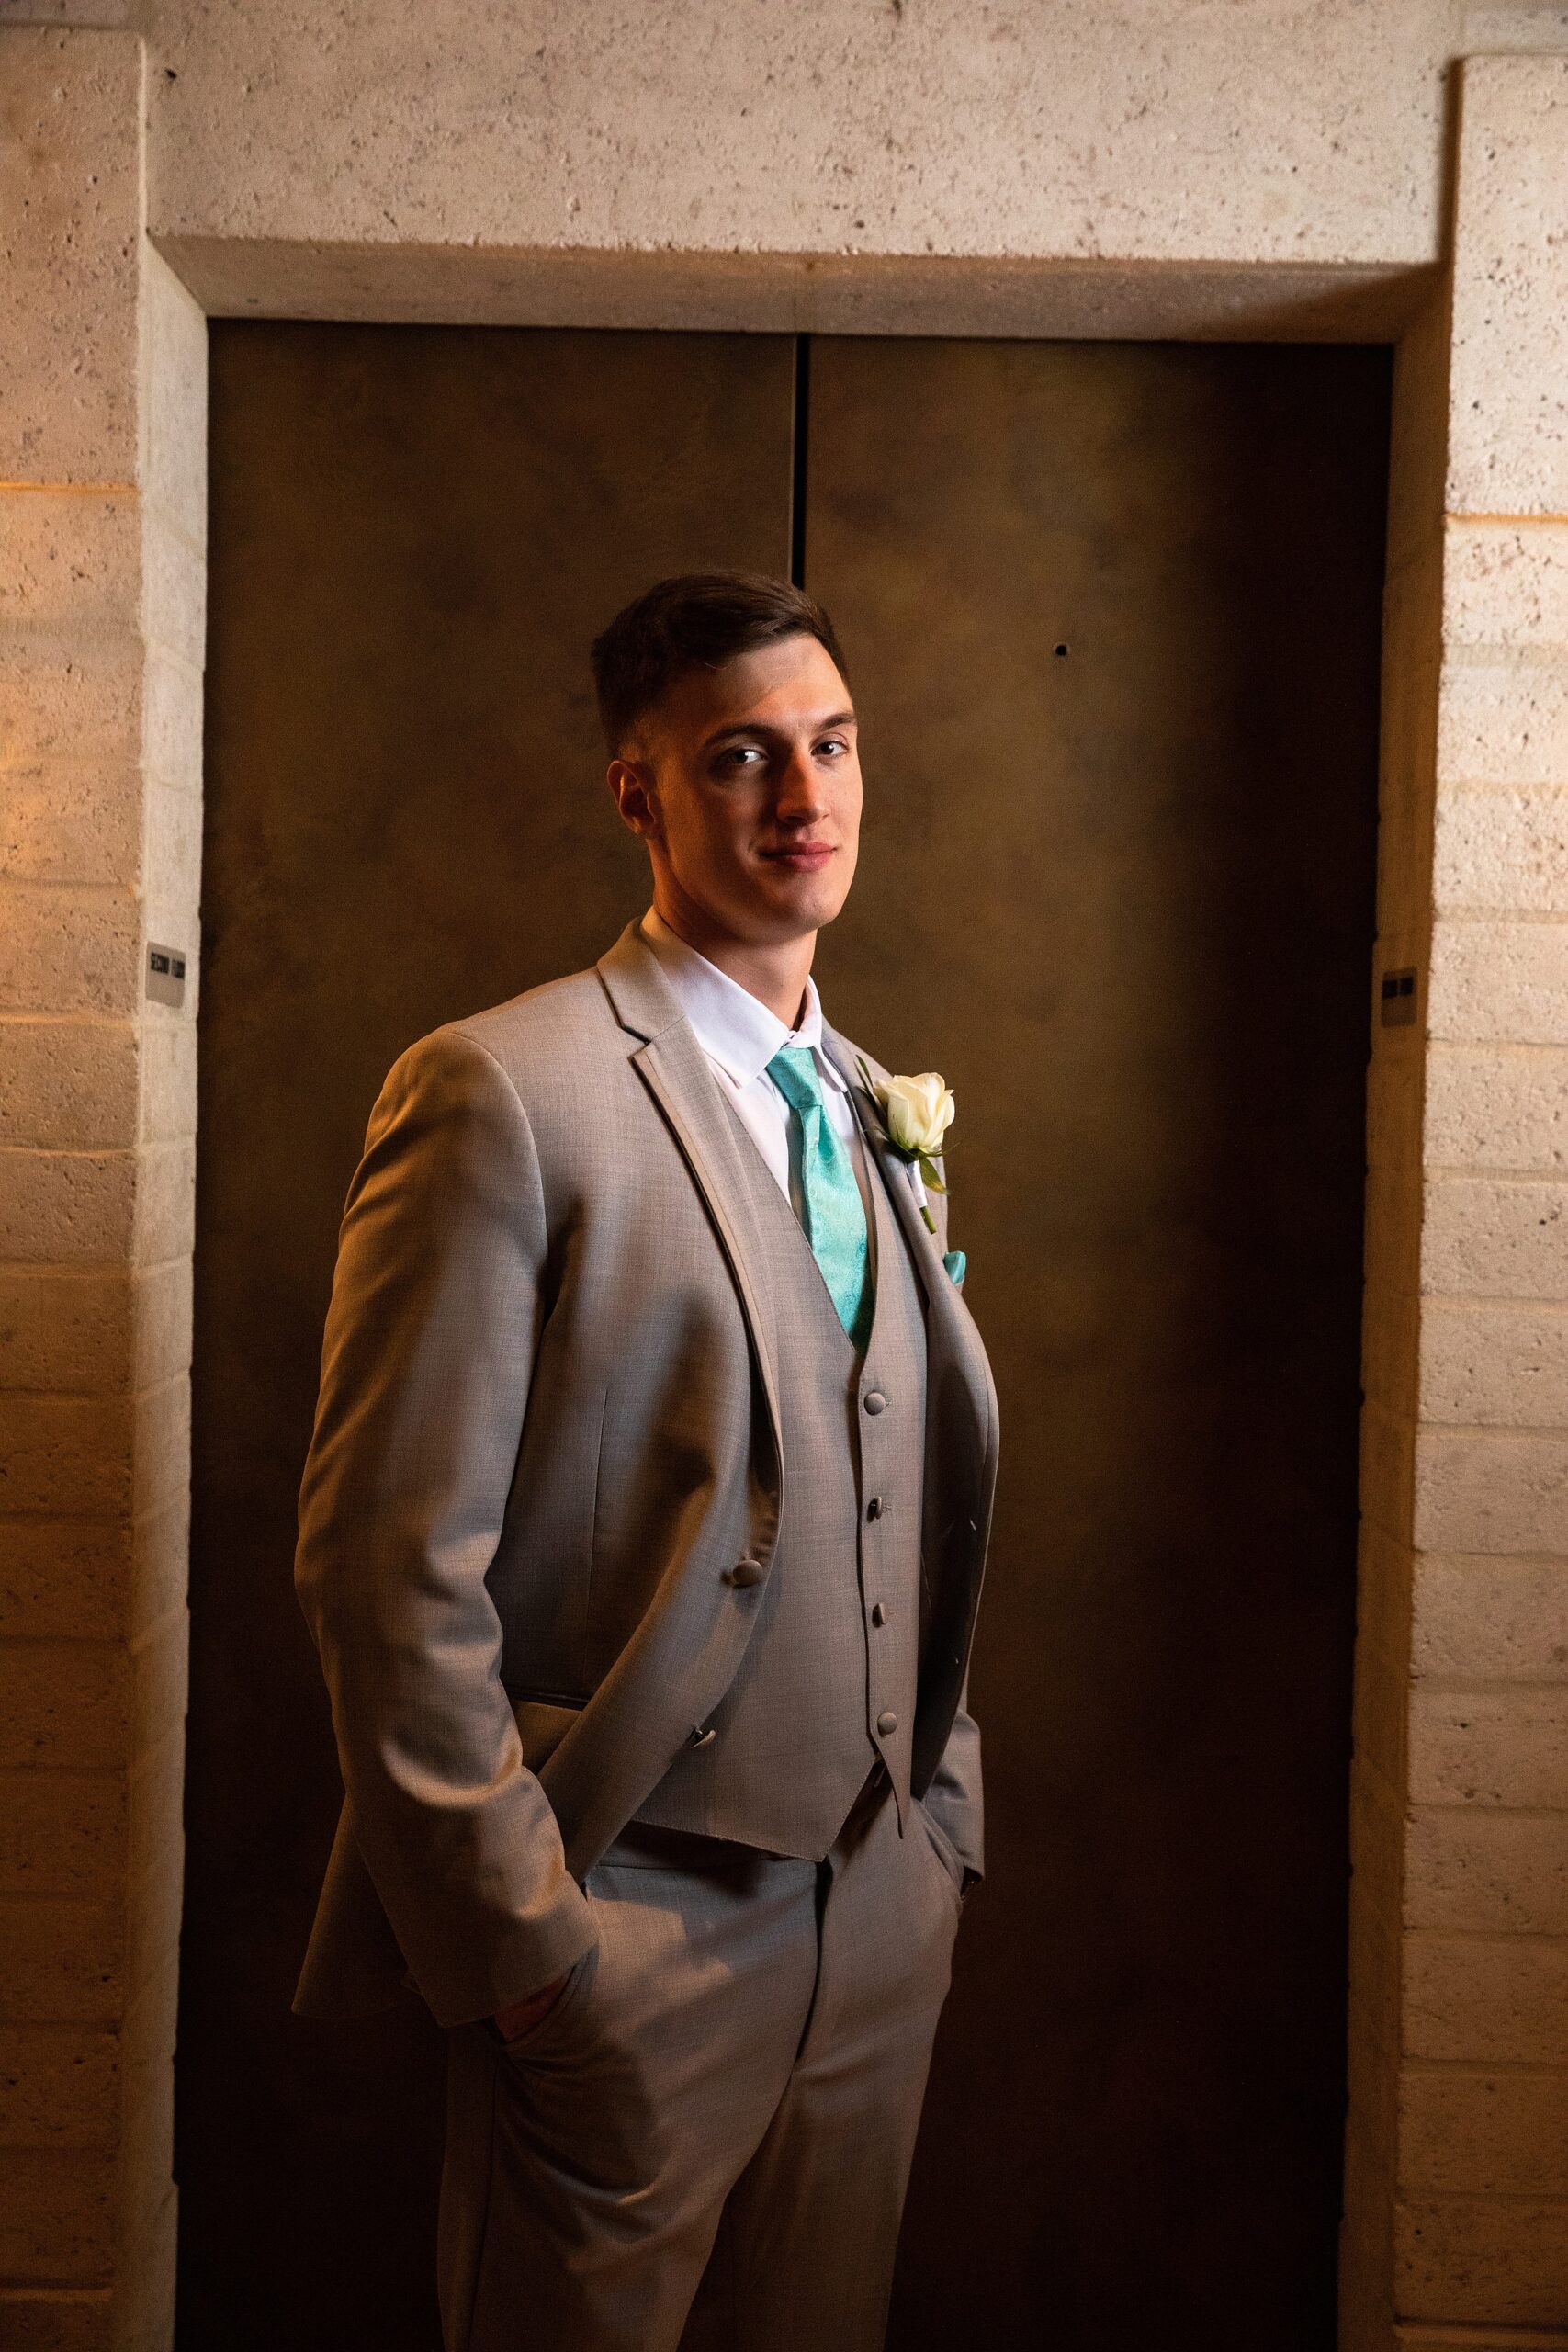 A groom stands in a grey suit and teal tie in front of an elevator door